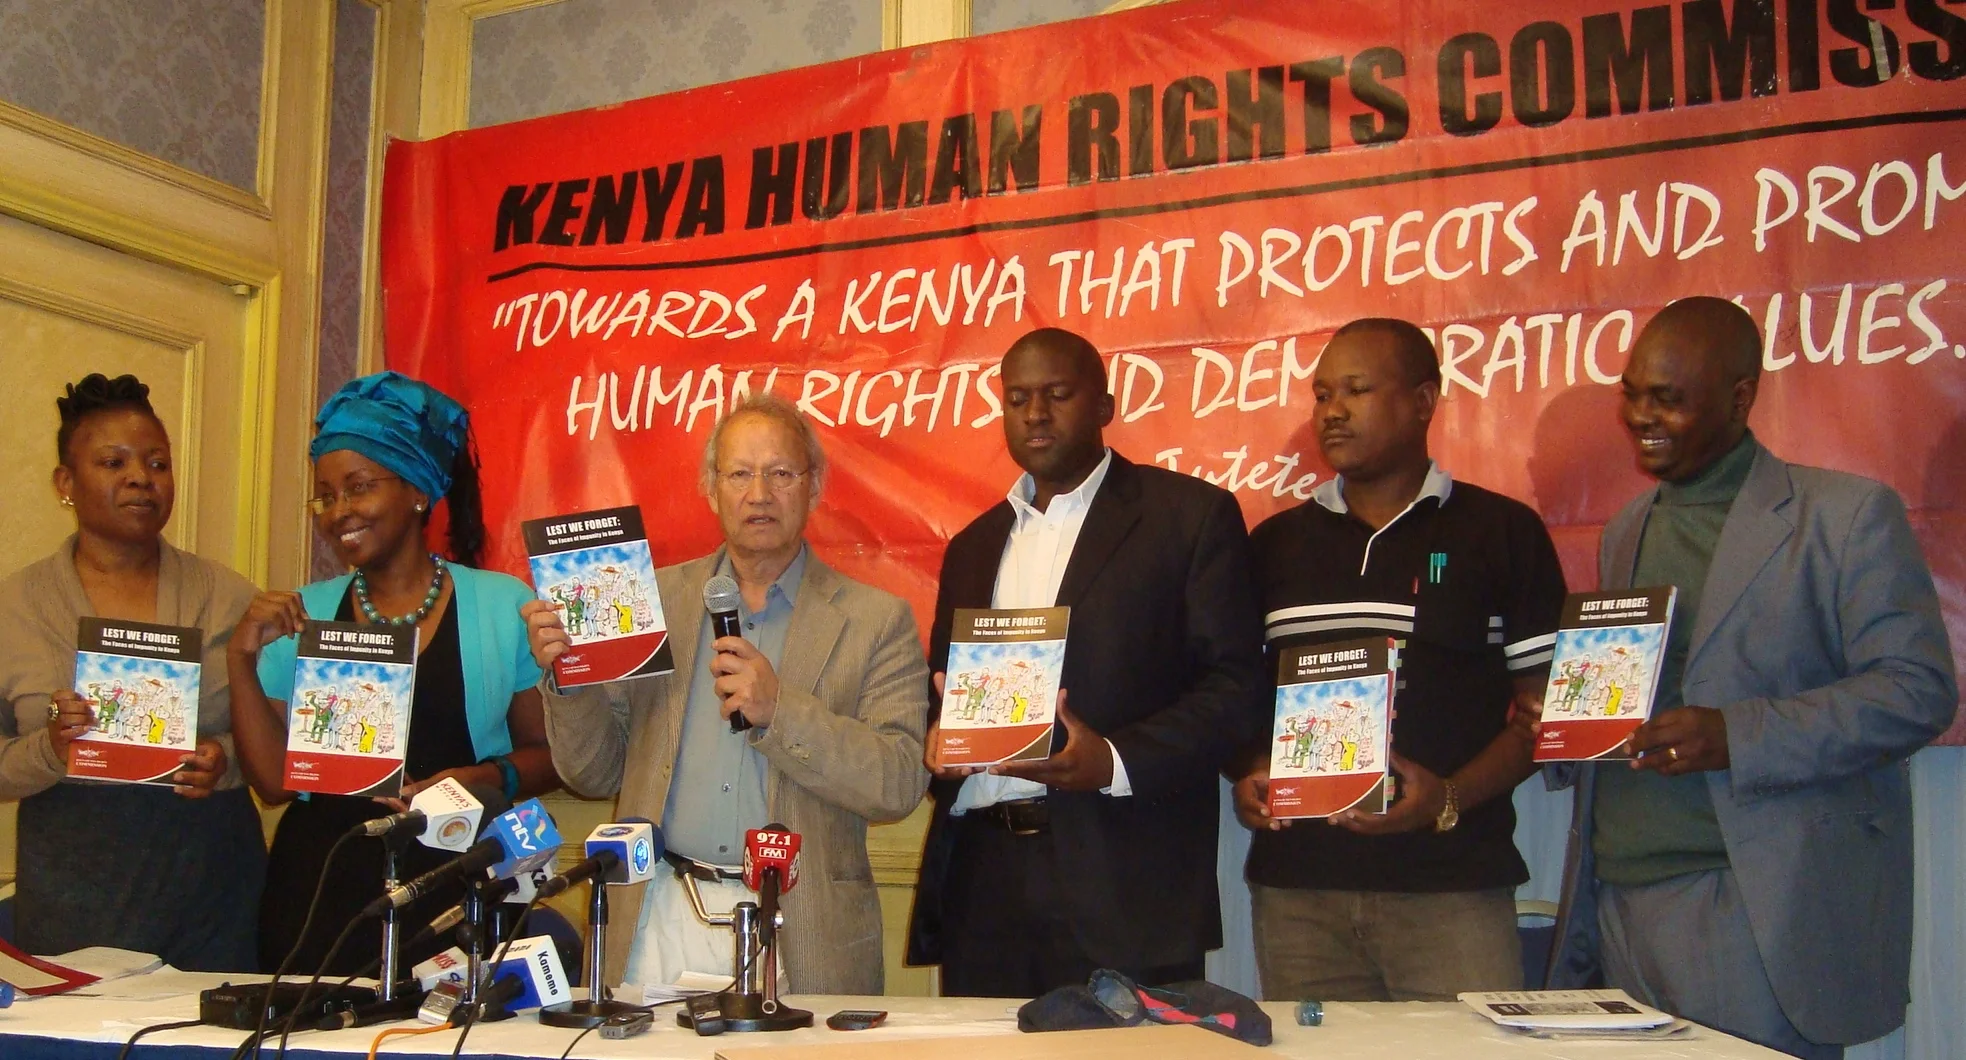 Prof. Yash Pal Ghai, Director of Katiba Institute officially launches the report. Others, from left to right are Atsango Chesoni- Executive Director KHRC; Betty Murungi-Vice Chair KHRC Board of Directors; Cyprian Nyamwamu-Convener NCEC; Tom Kagwe-Senior Programme Officer KHRC; and Davis Malombe-Deputy Executive Director KHRC